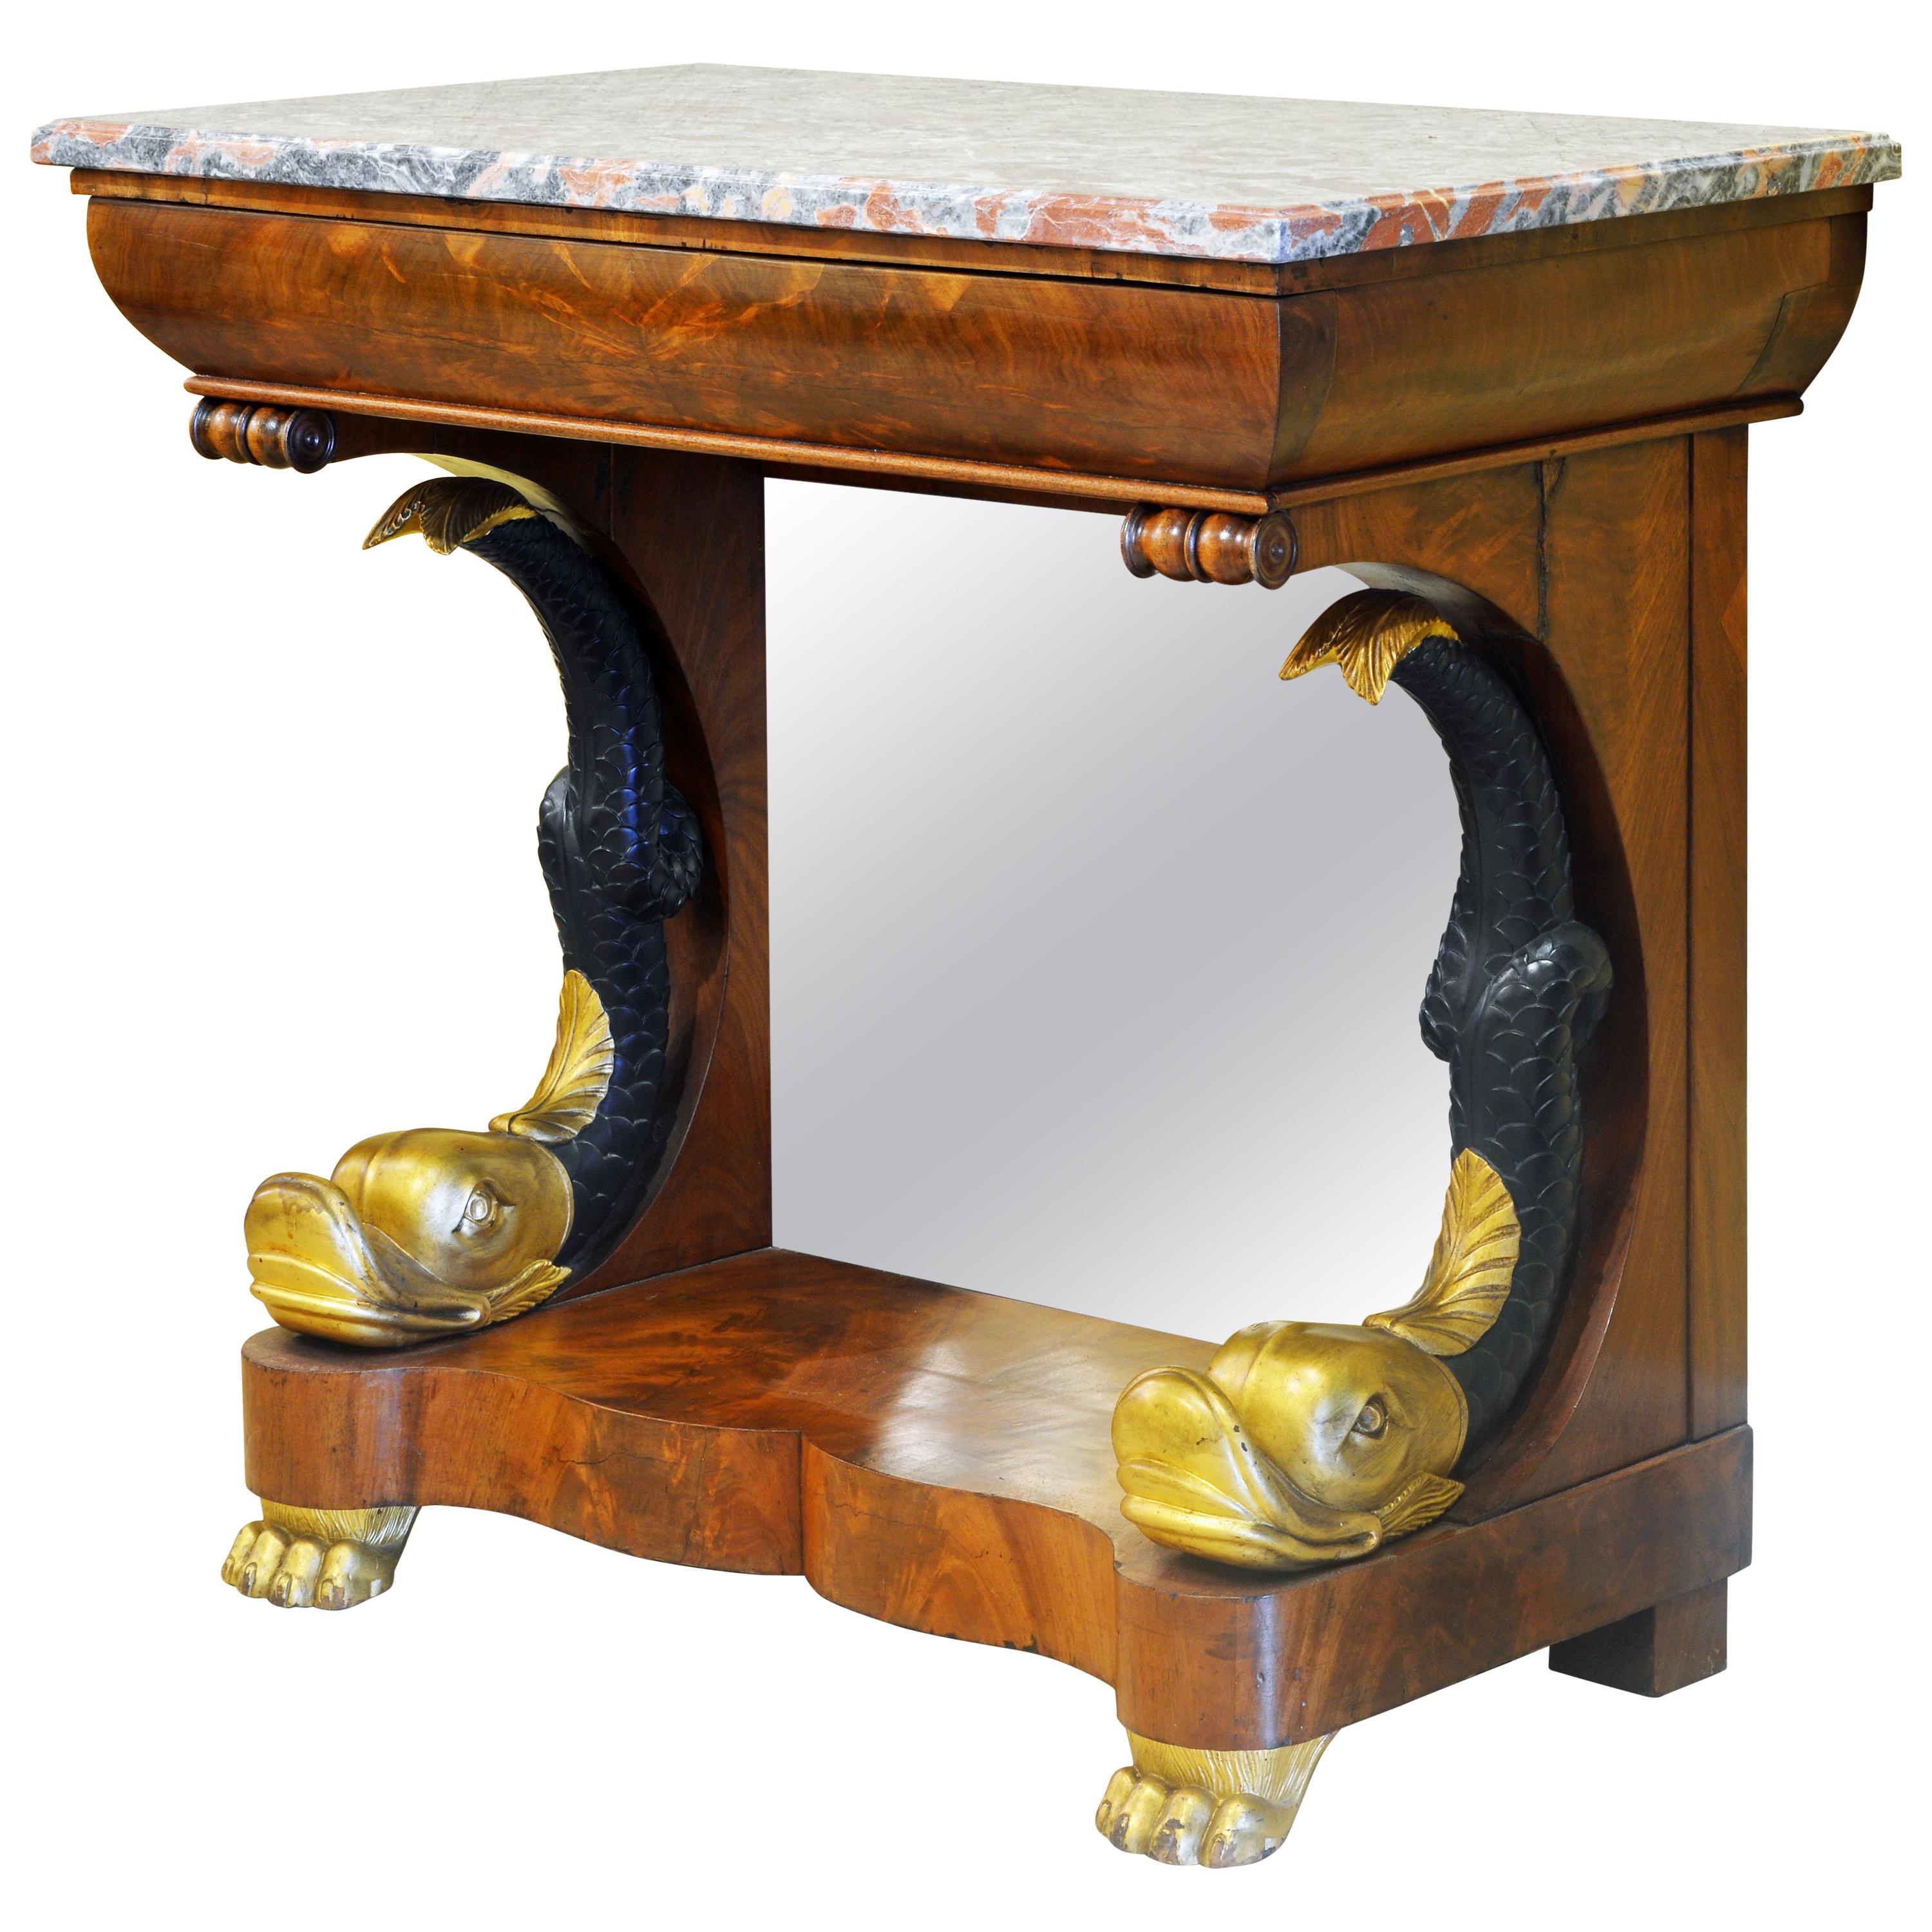 Mid-19th Century English Carved and Parcel Gilt Marble Top Dolphin Console Table